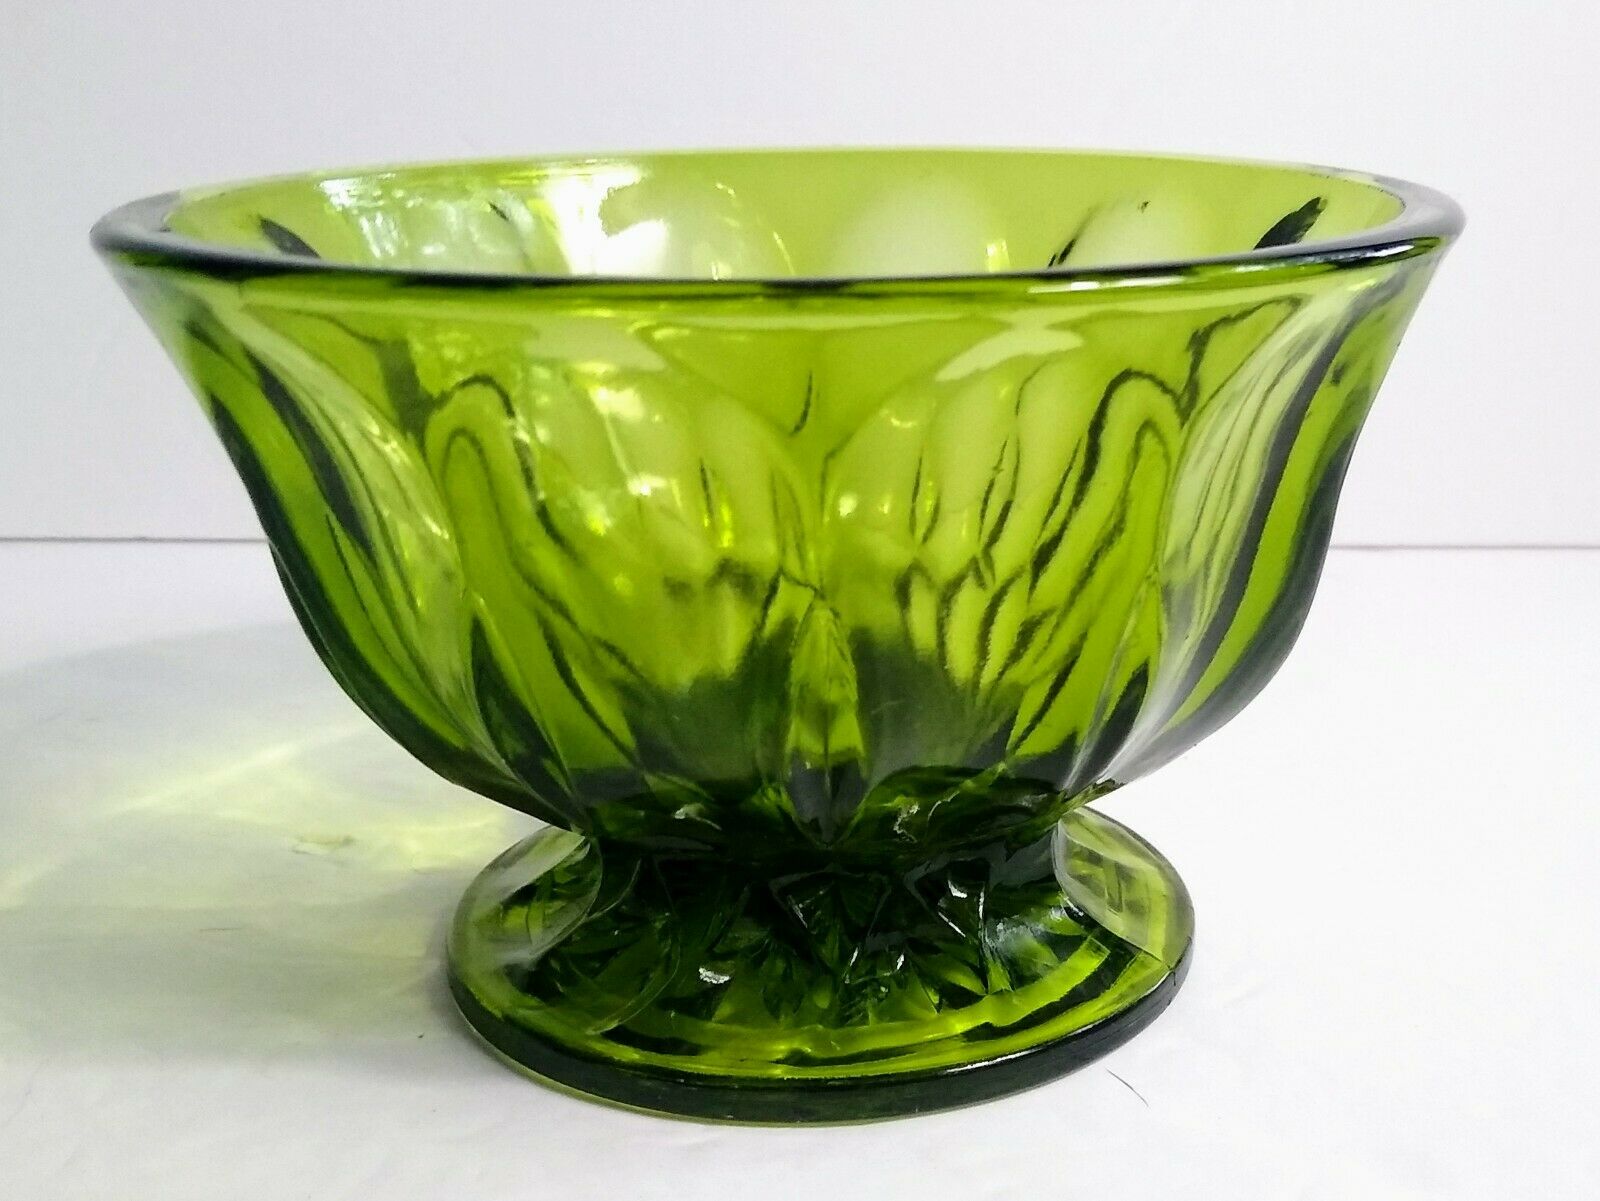 Anchor Hocking "fairfield" Avocado Glass Candy Dish/compote, Cr. 1972-76